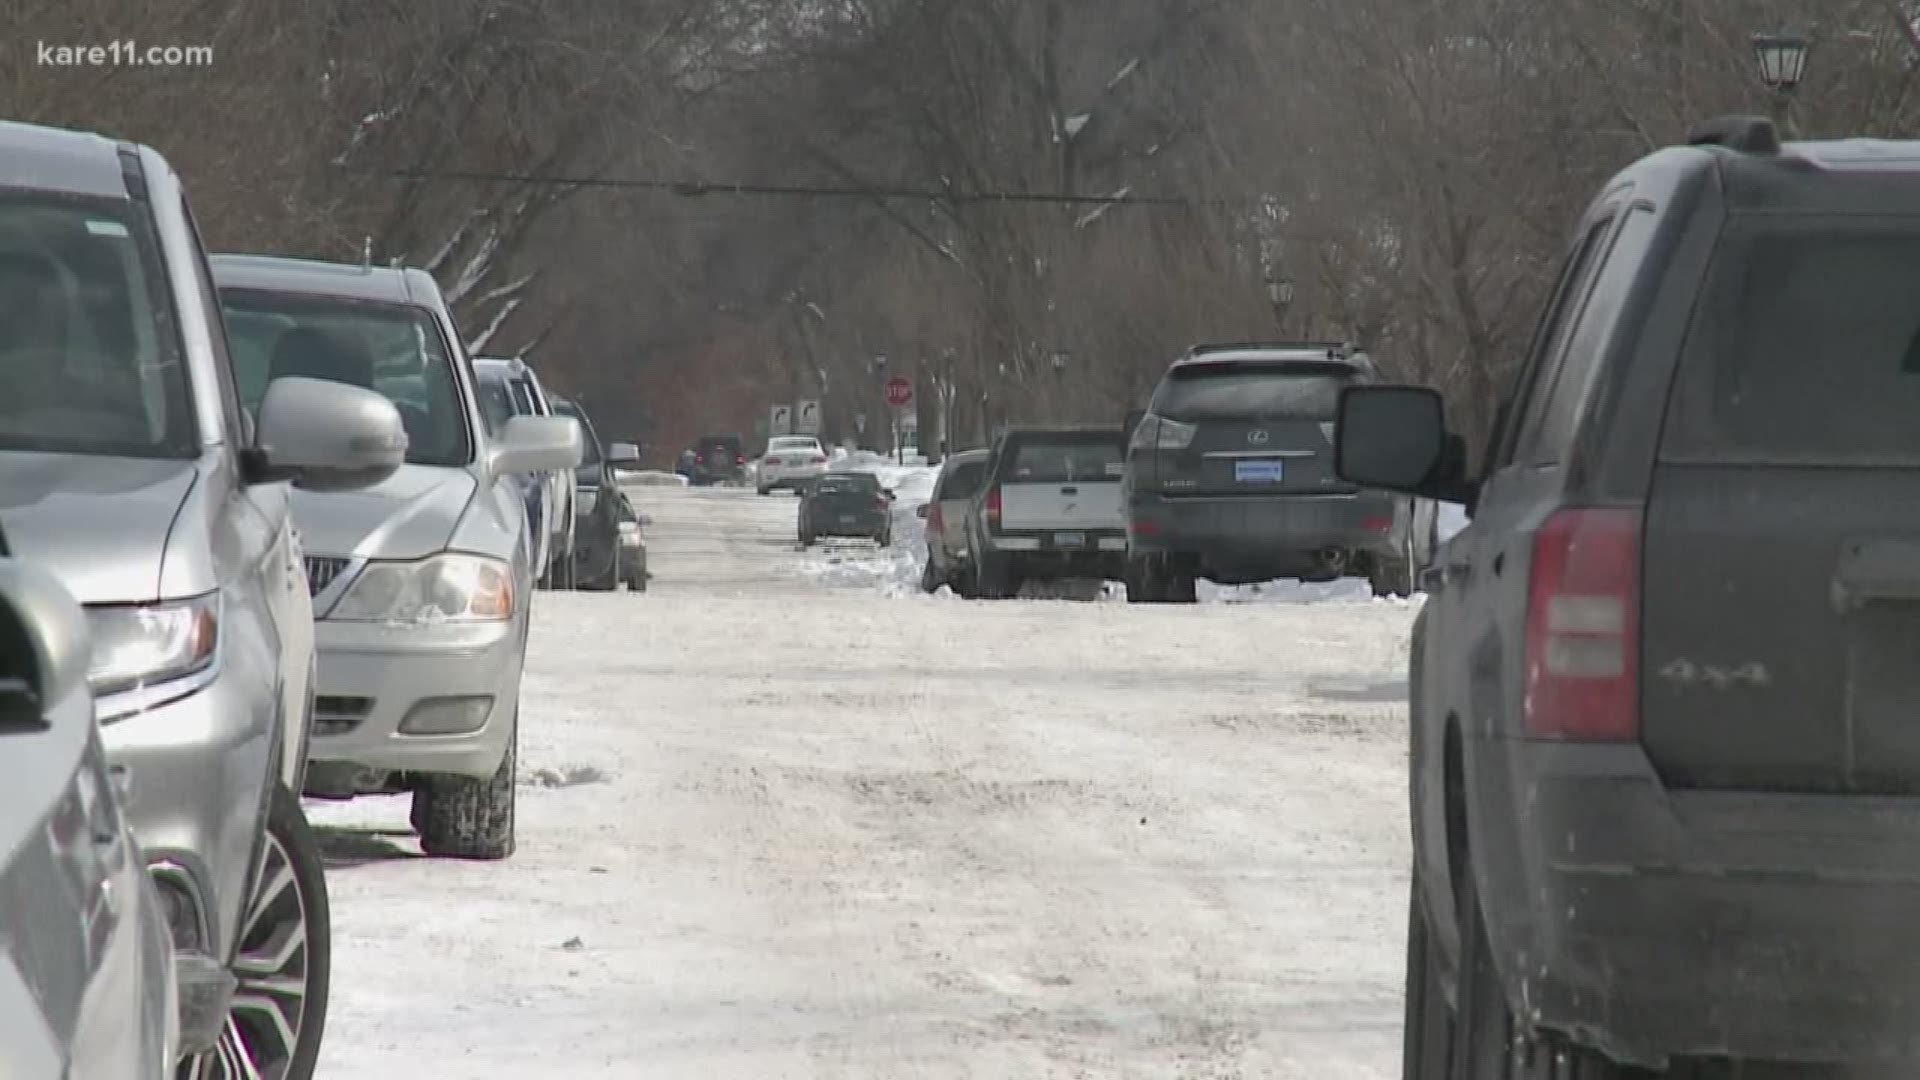 Historic snow -- means historic action in St. Paul.
Parking restrictions are now in effect for only the second time ever.